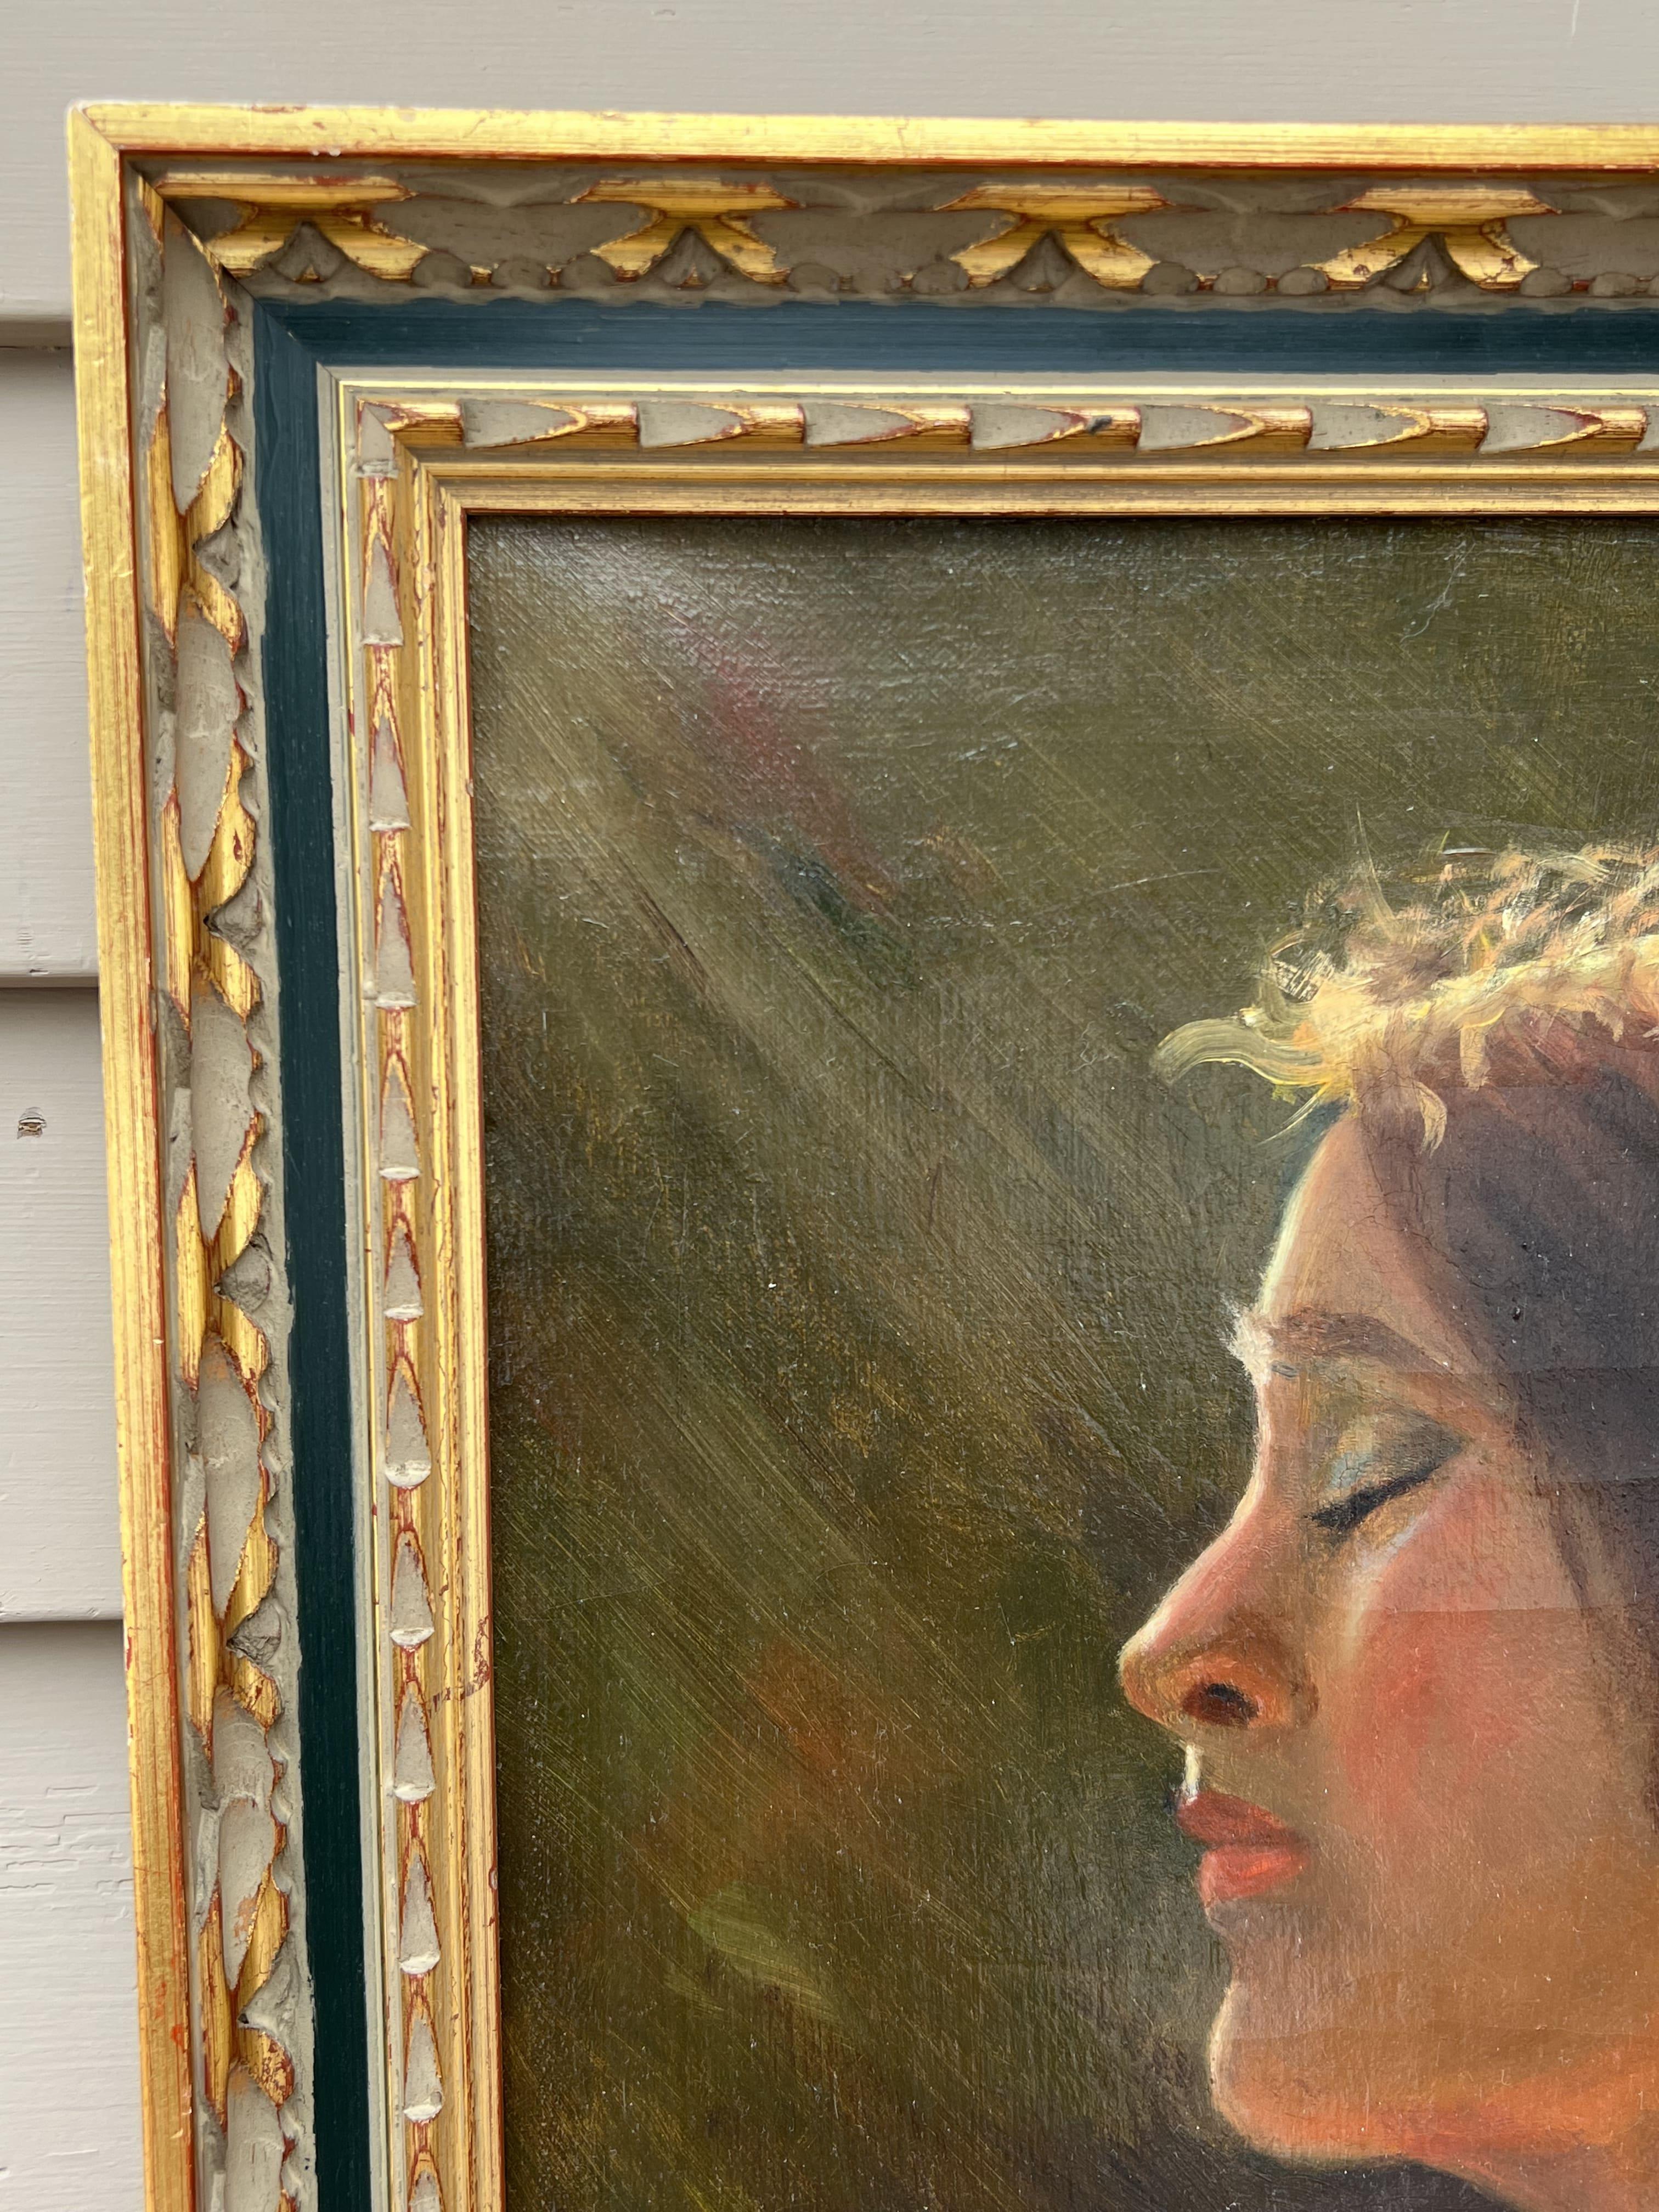 This is a beautiful original oil painting on canvas, depicting the Portrait of a woman in a profile, titled 